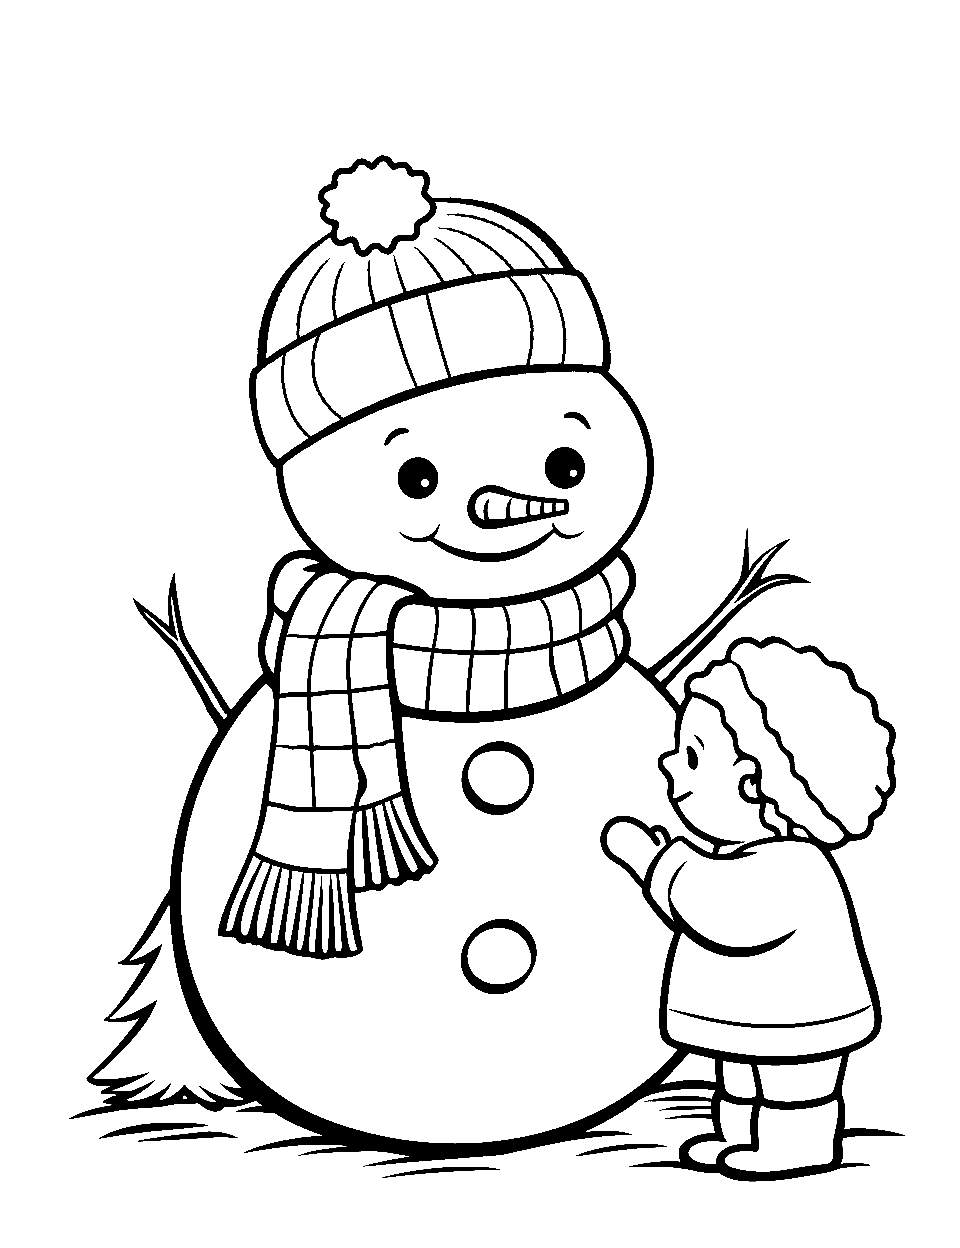 Toddler Playing with Snowman Coloring Page - A toddler joyfully playing next to a snowman.